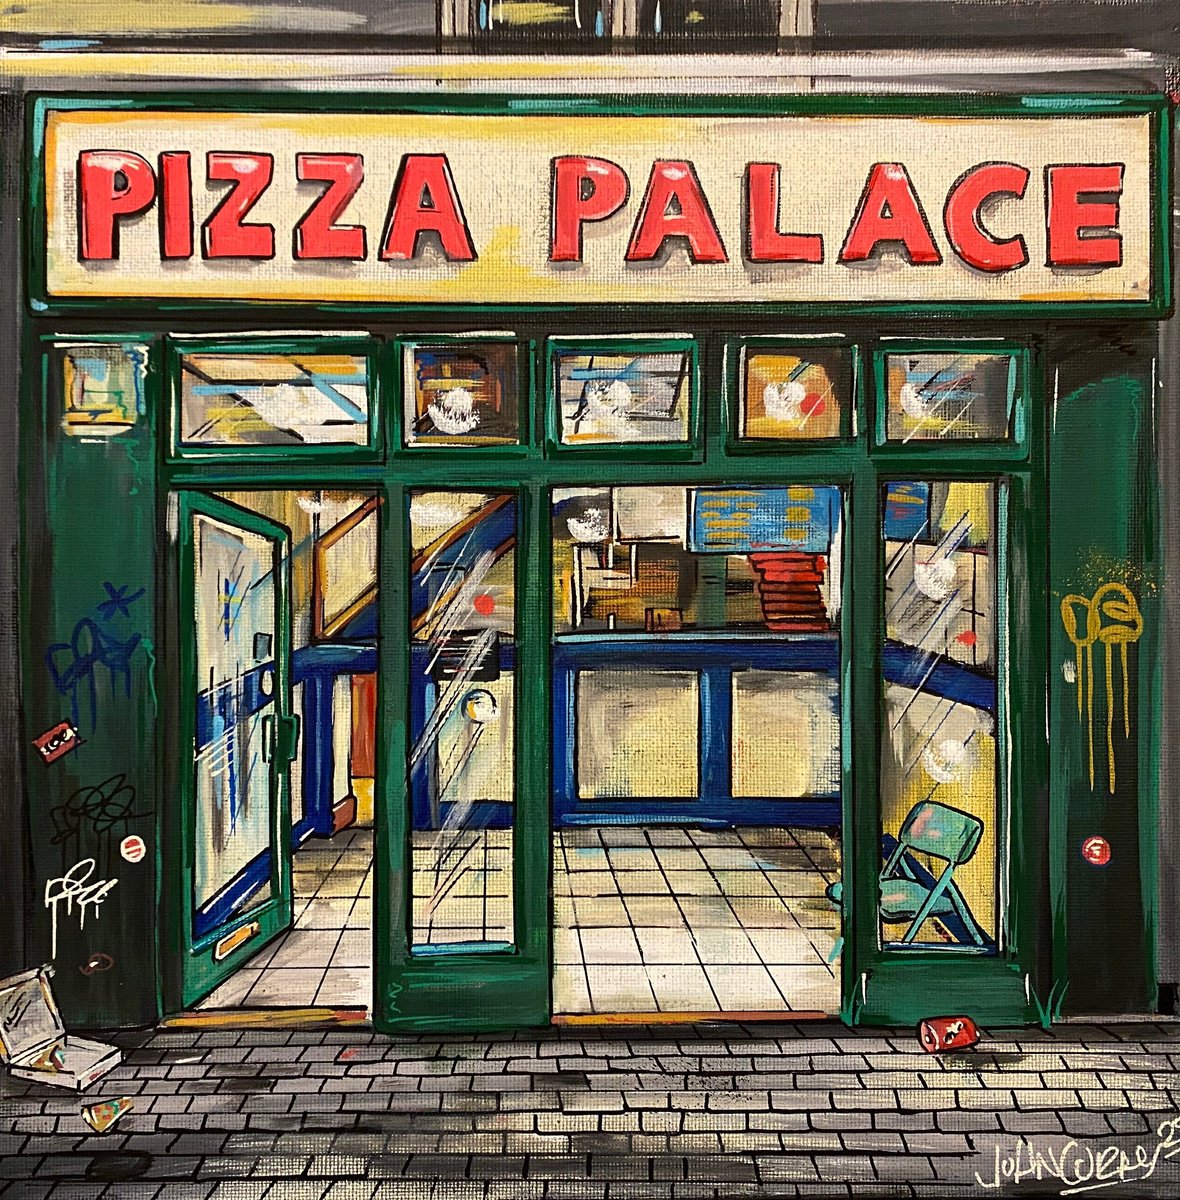 Pizza Palace - Original on canvas board by John Curtis